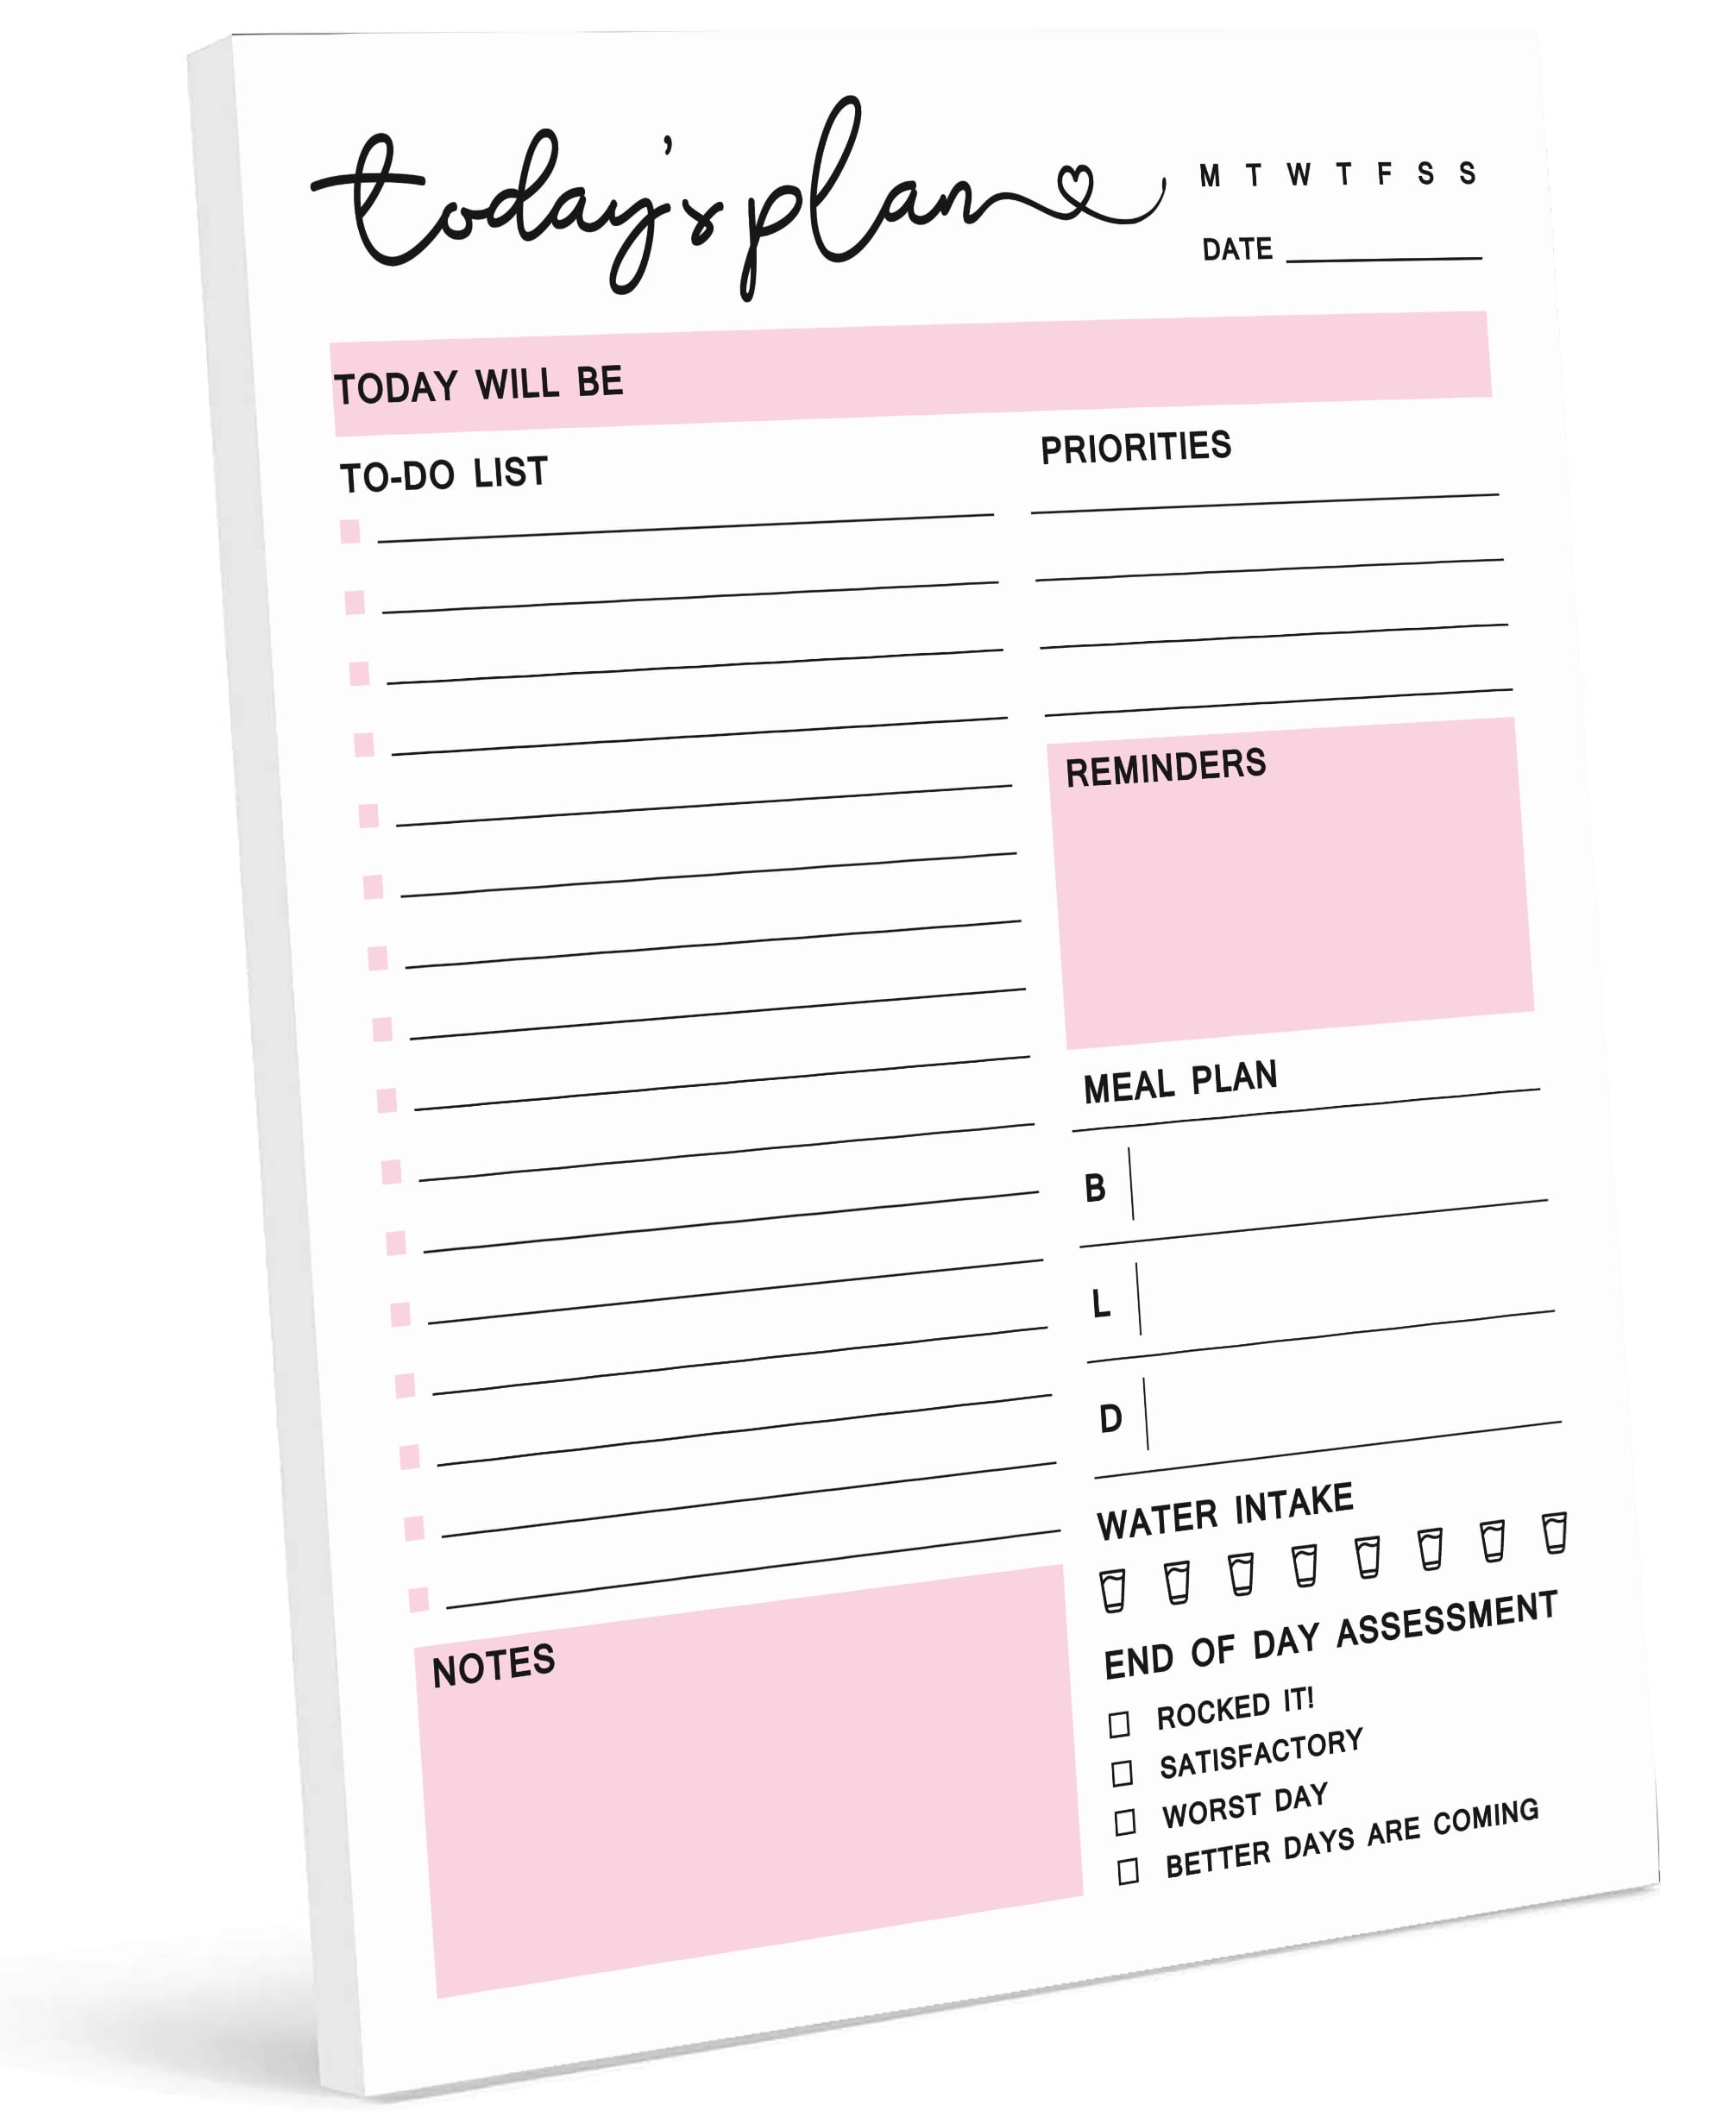 bloom daily planners Undated Health & Wellness Log Planning Pad Daily/Weekly Nutrition Self-Care Tear-Off Planner 8.5 x 11 Fitness 